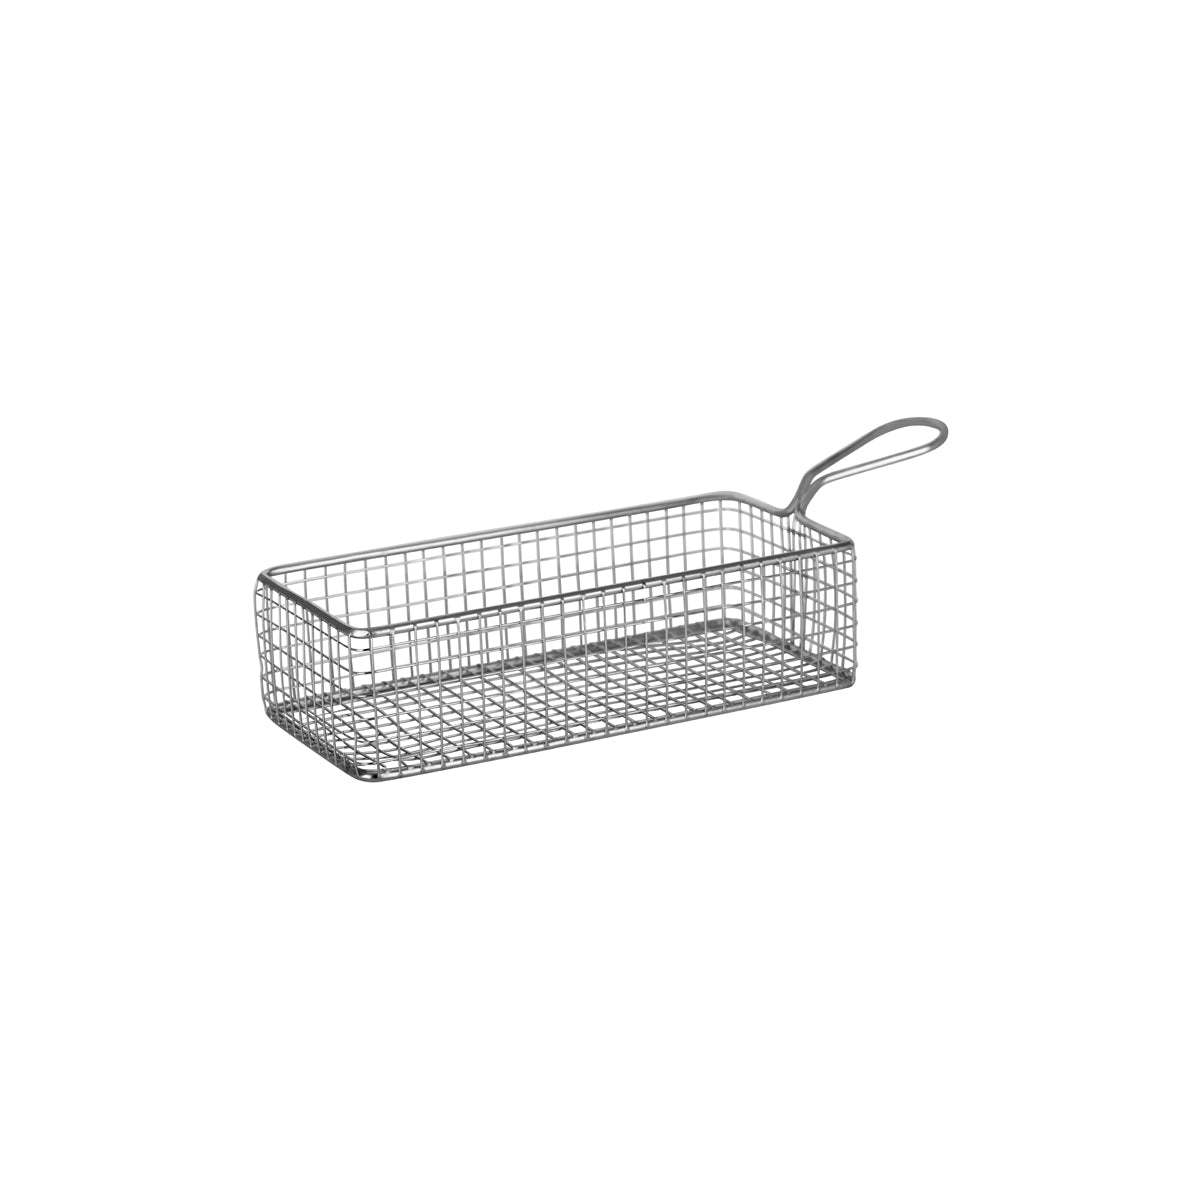 '07687 Chef Inox Wire Serving Basket Rectangular with Handle 200x100x60mm Tomkin Australia Hospitality Supplies